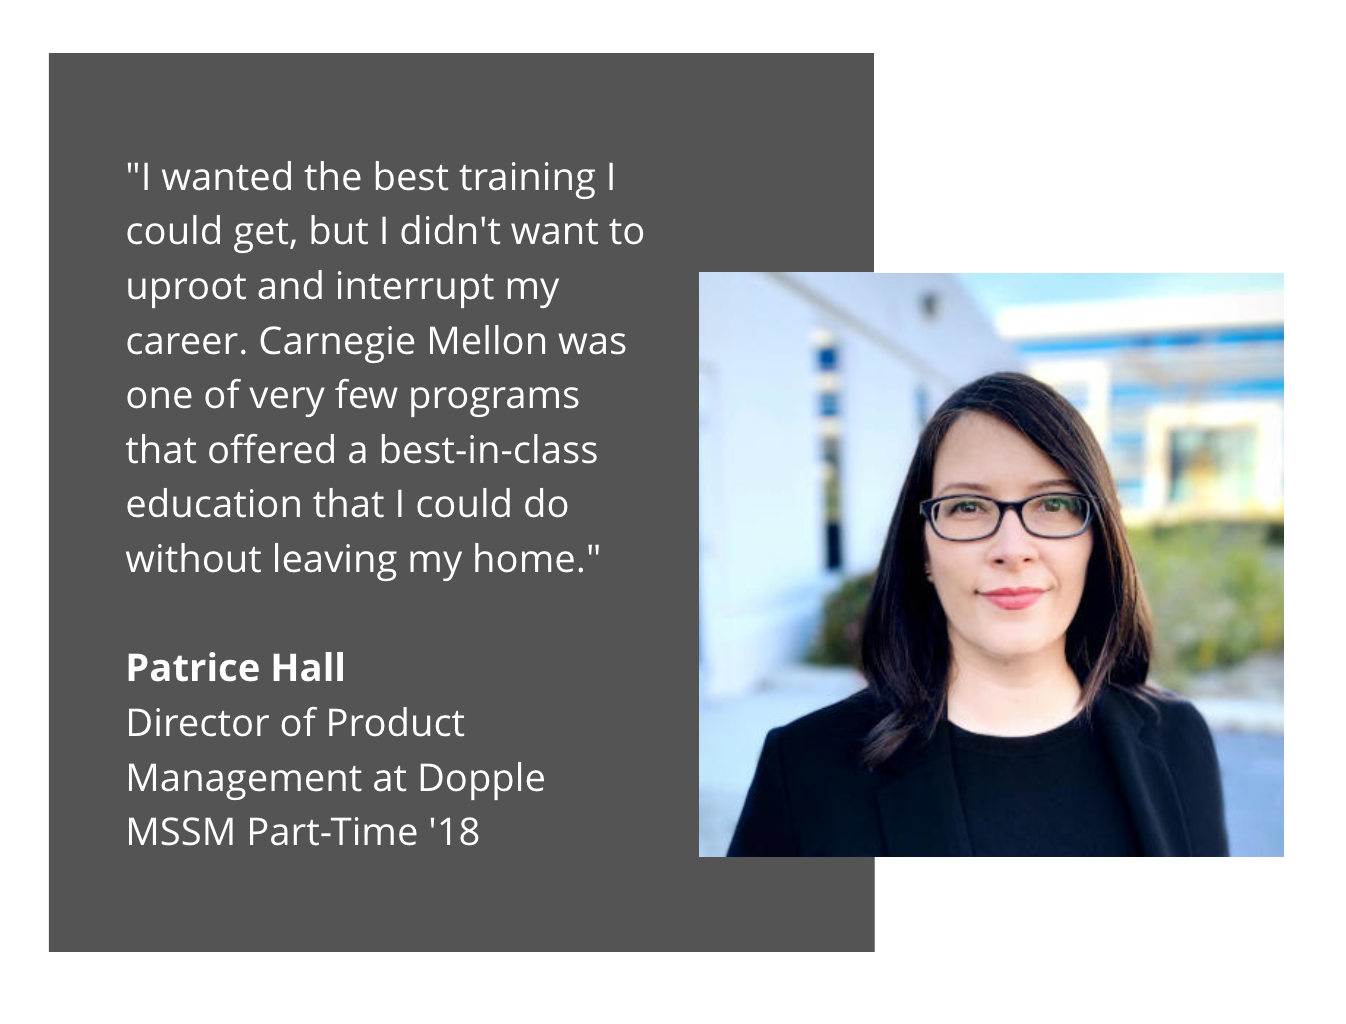 MSSM Patrice Hall testimonial: "I wanted the best training I could get, but I didn't want to uproot and interrupt my career. Carnegie Mellon was one of very few programs that offered a best-in-class education that I could do without leaving my home."  Patrice Hall Director of Product Management at Dopple MSSM Part-Time '18